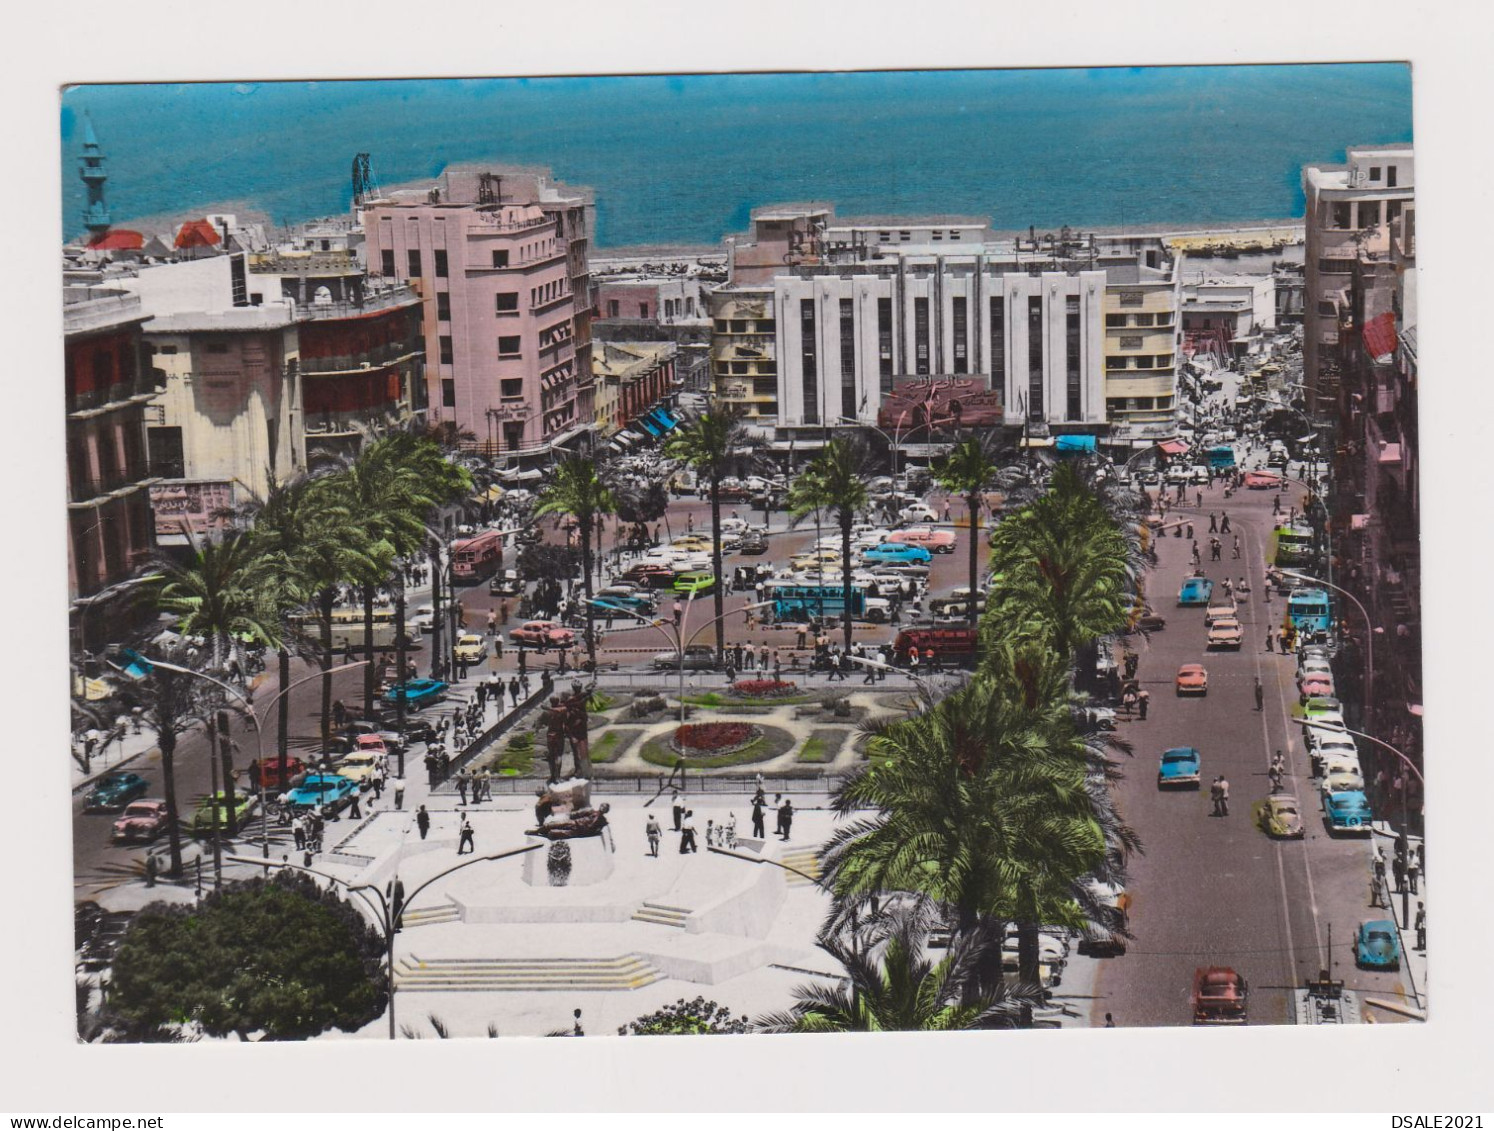 Lebanon Liban BEIRUT MARTYR'S Square, Many Old Car, Vintage Photo Postcard W/Topic Stamp Sent Airmail To Bulgaria /1304 - Liban